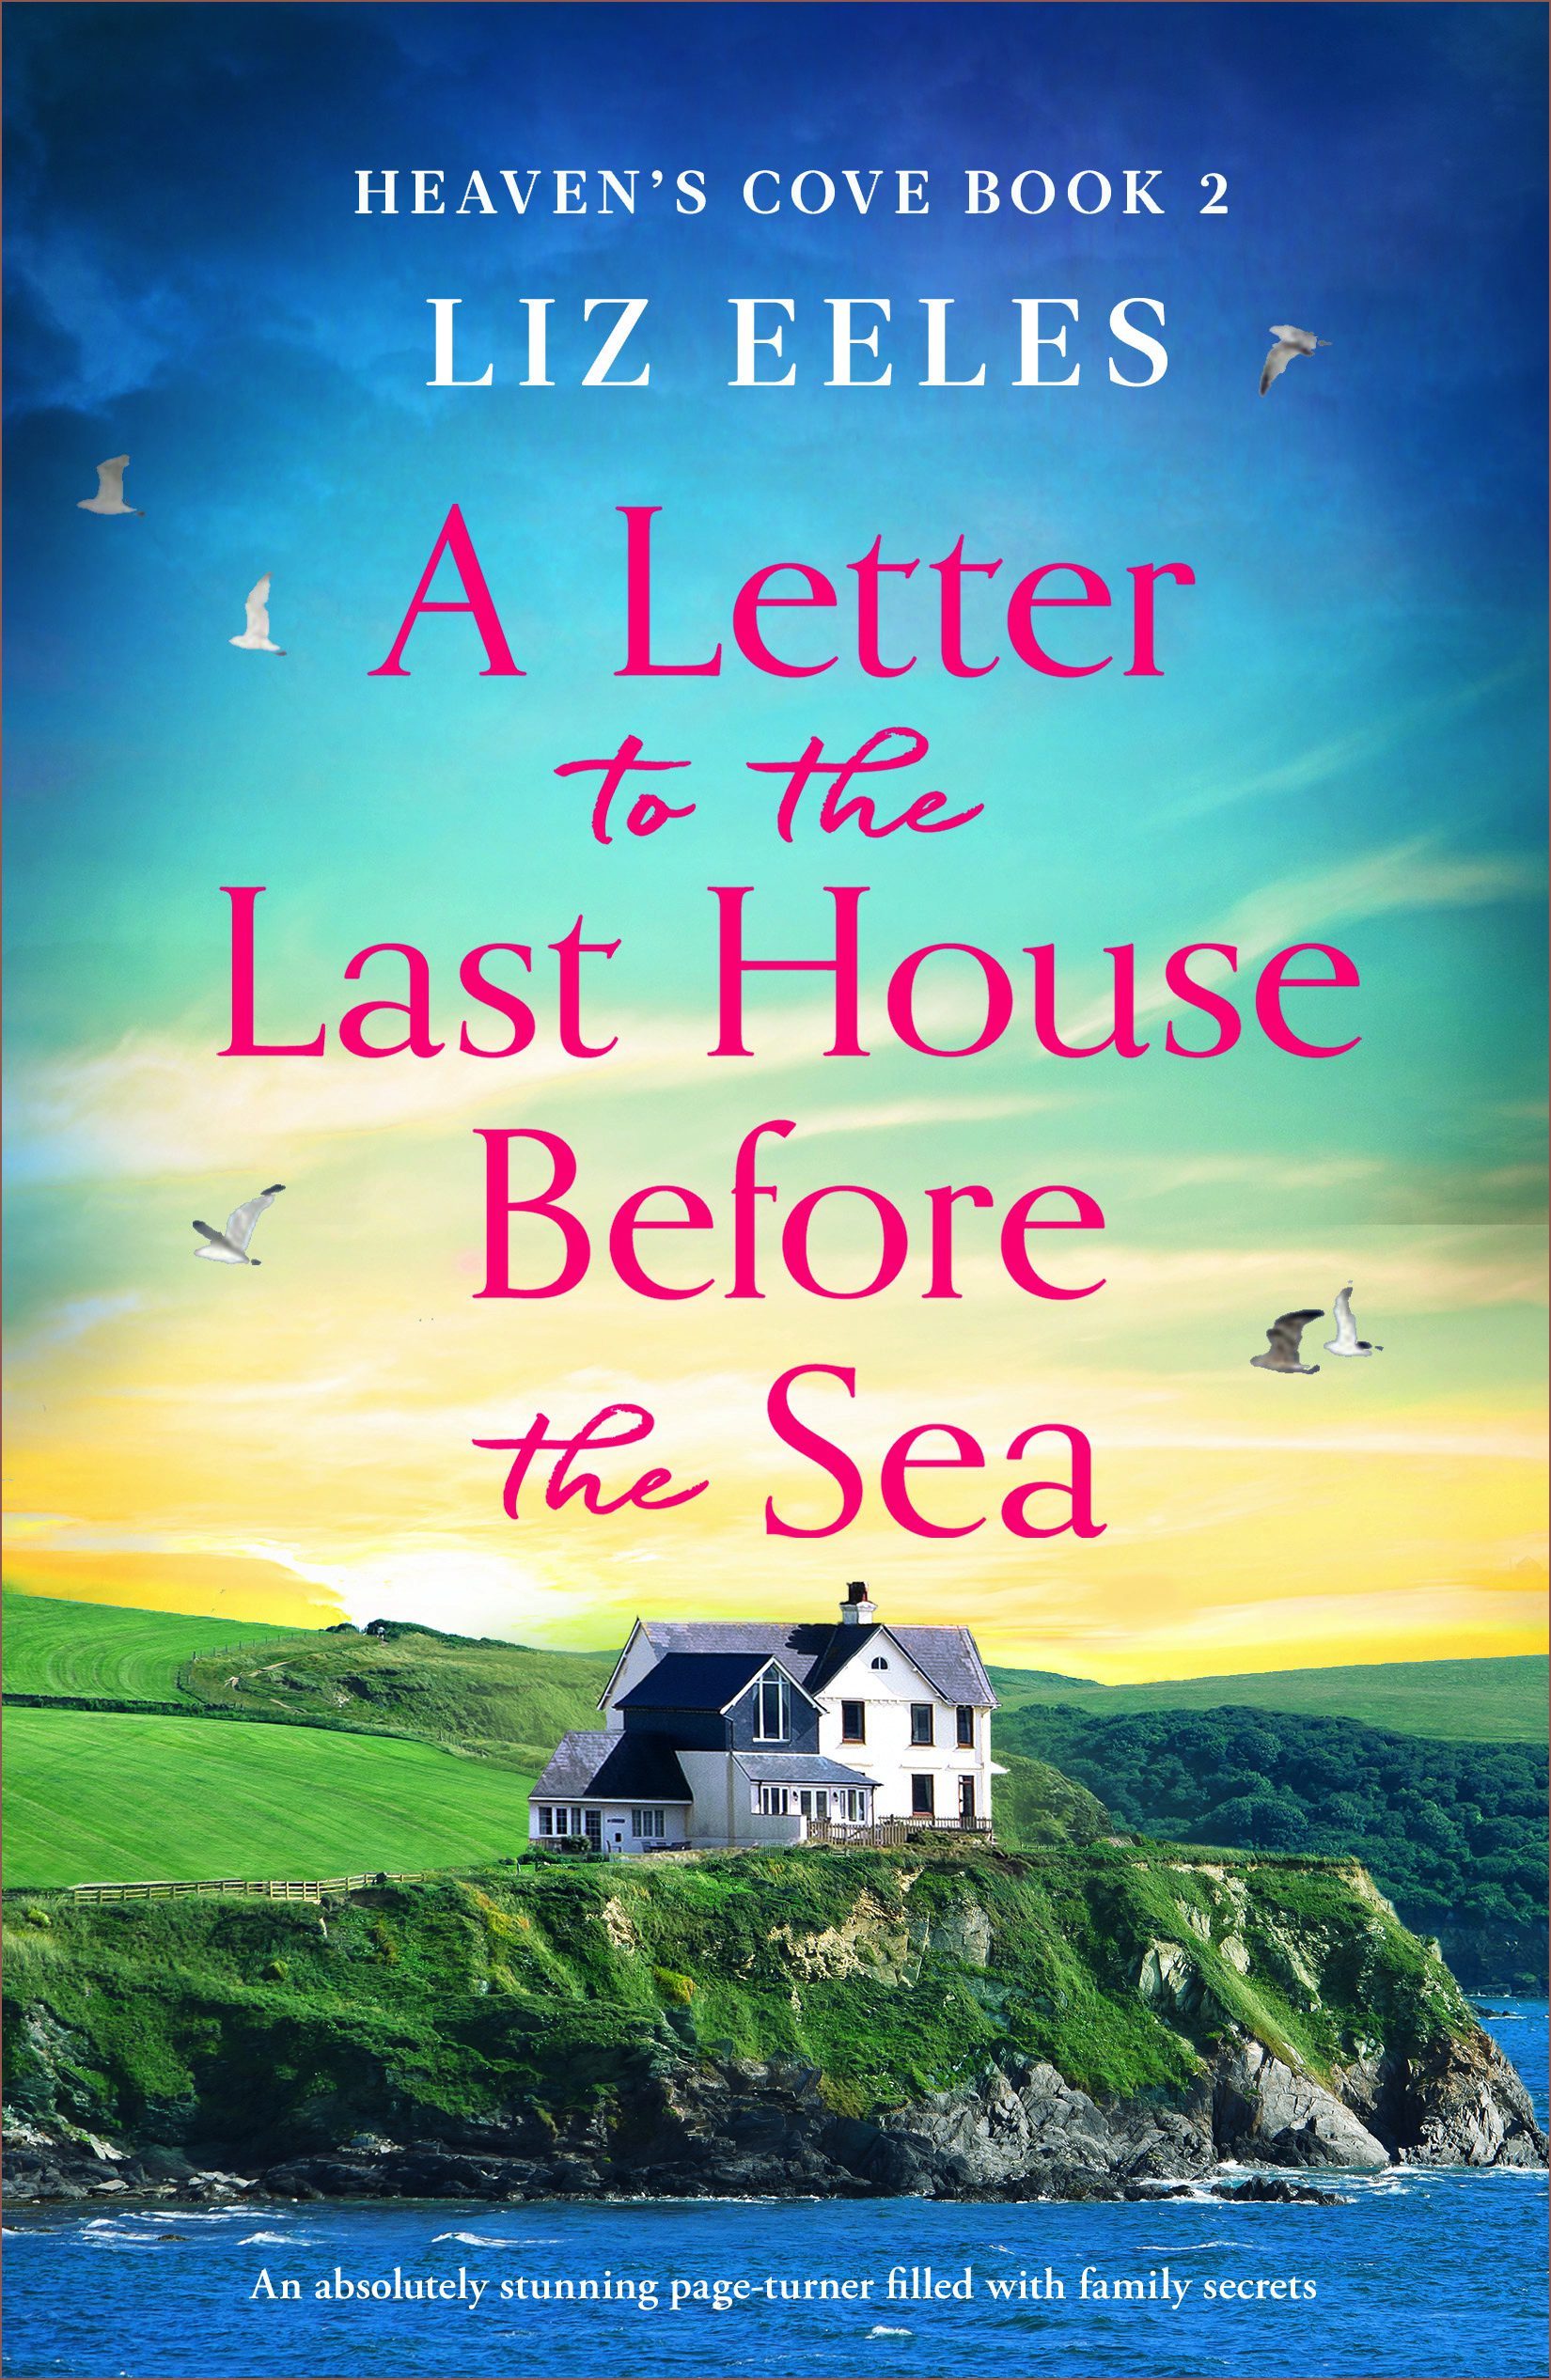 A Letter to the Last House Before the Sea book cover